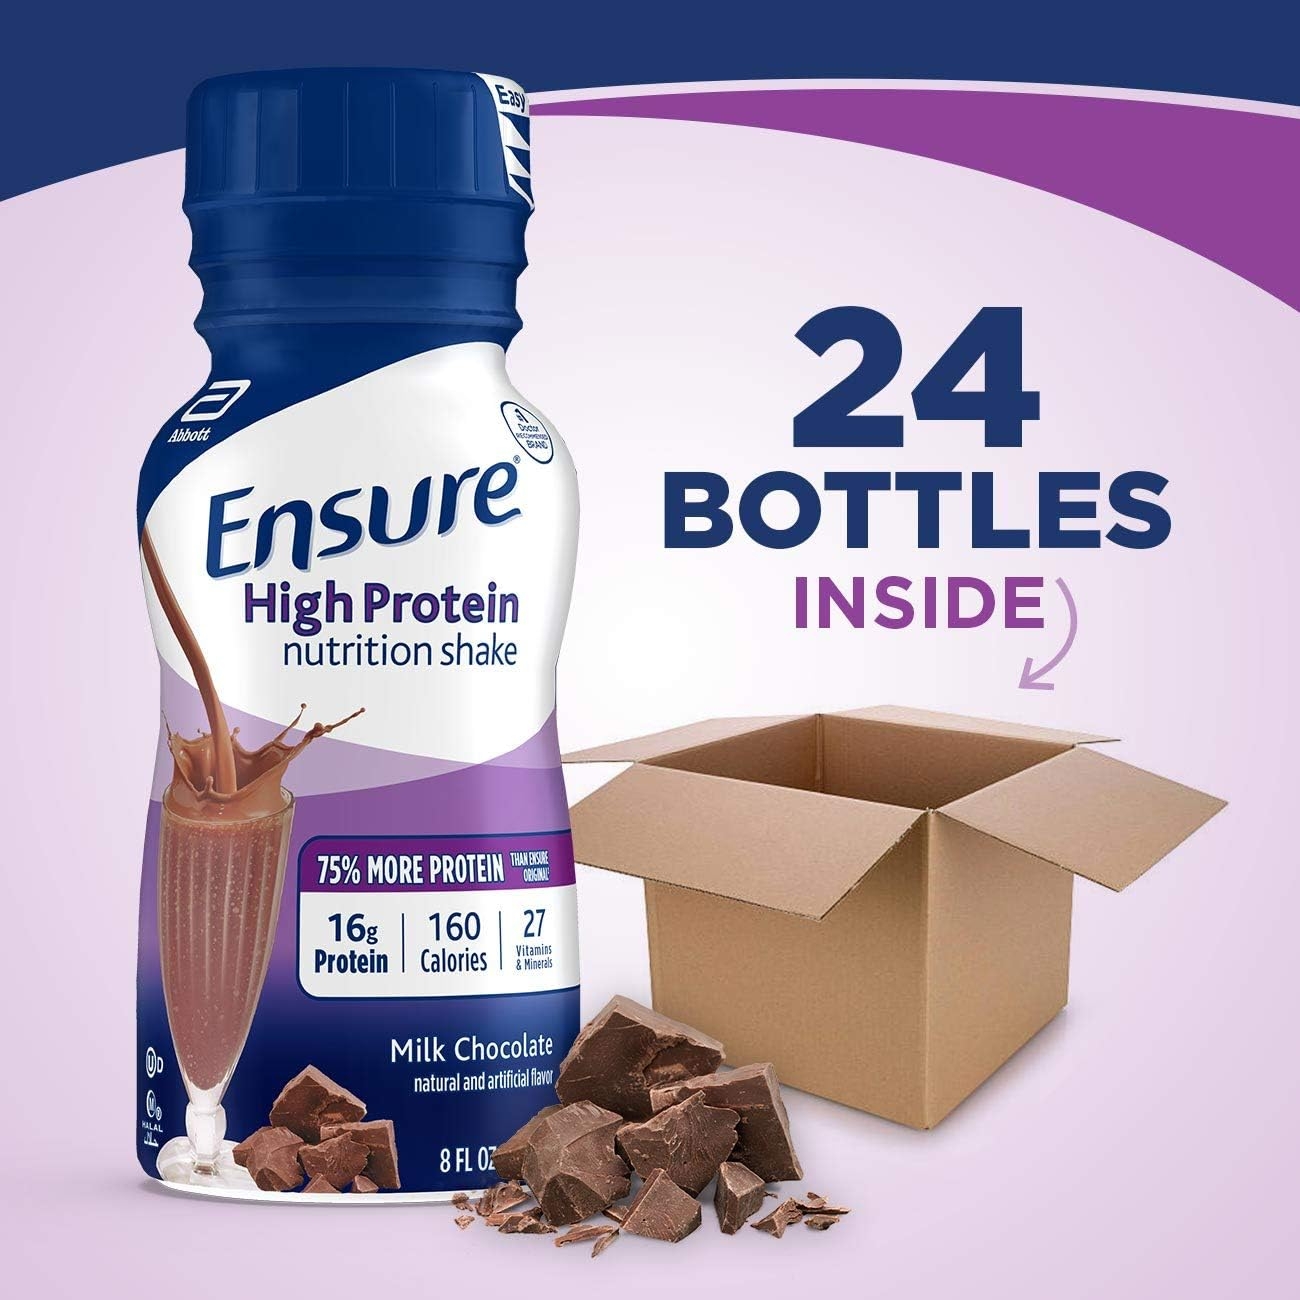 Ensure High Protein Nutritional Shake with 16g of Protein, Ready-to-Drink Meal Replacement Shakes, Low Fat, Milk Chocolate, 8 fl oz, 24 Count